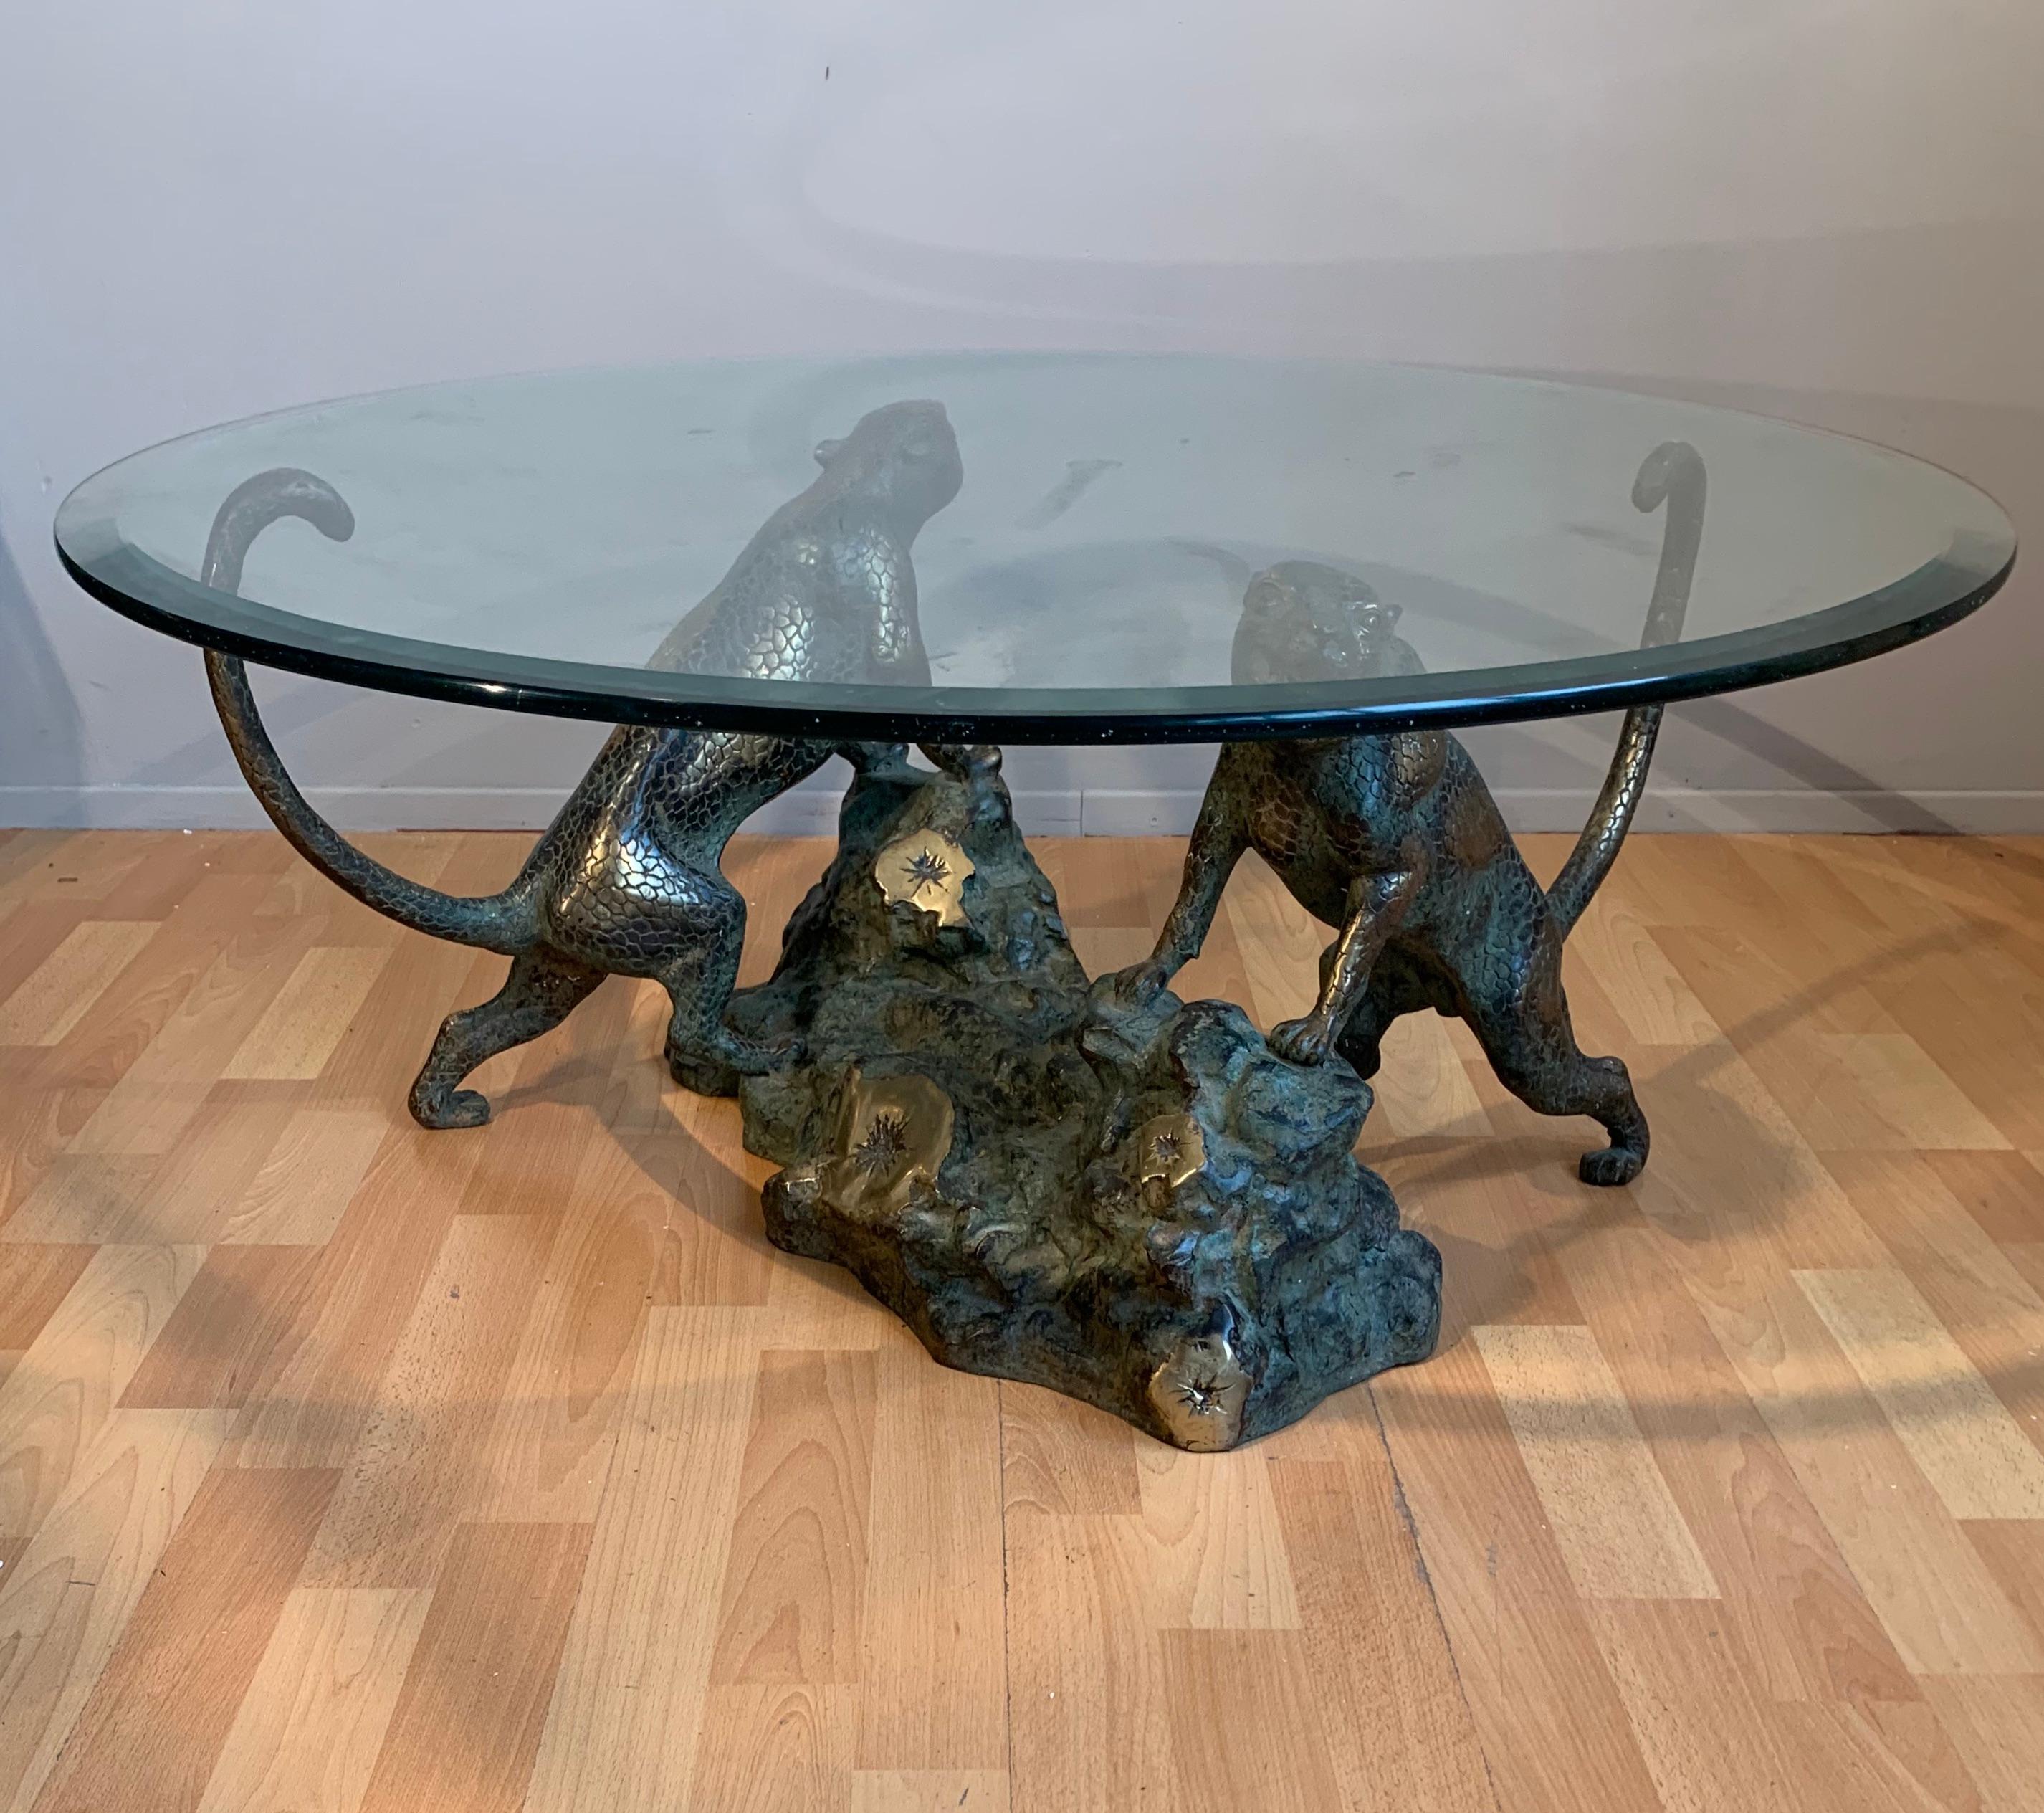 Good size, practical and highly decorative round coffee table.

If you are looking for a rare and beautiful quality coffee or sofa table then this highly decorative specimen could be yours to own and enjoy soon. This unique design from the Hollywood